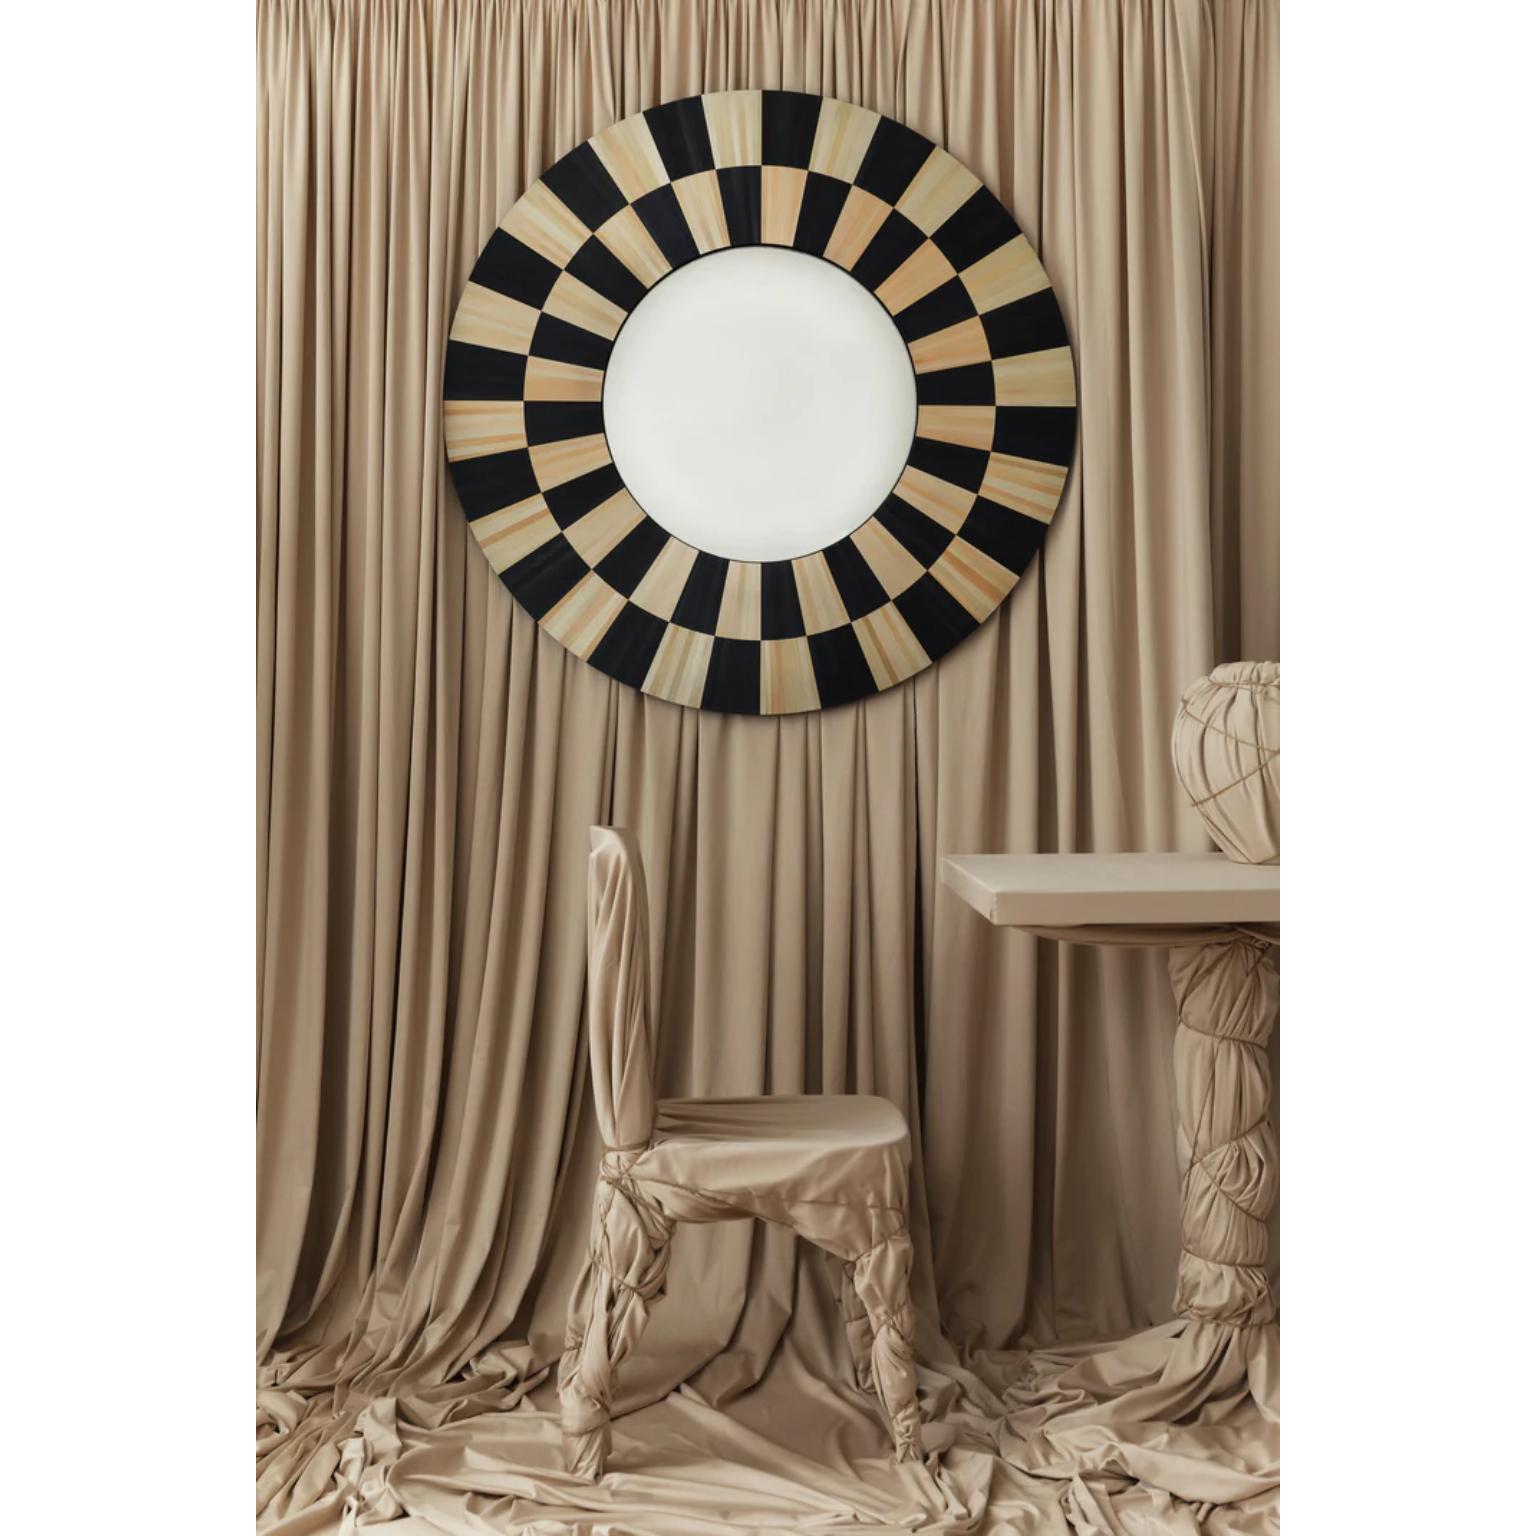 Target Wall Mirror by Ruda Studio
Dimensions: Ø 100 x H 100 cm.
Materials: MDF, painted rye straw and mirror.
Weight: 10 kg.

Dimensions are customizable. Please contact us. 

We create not just functional objects, but communicate with society